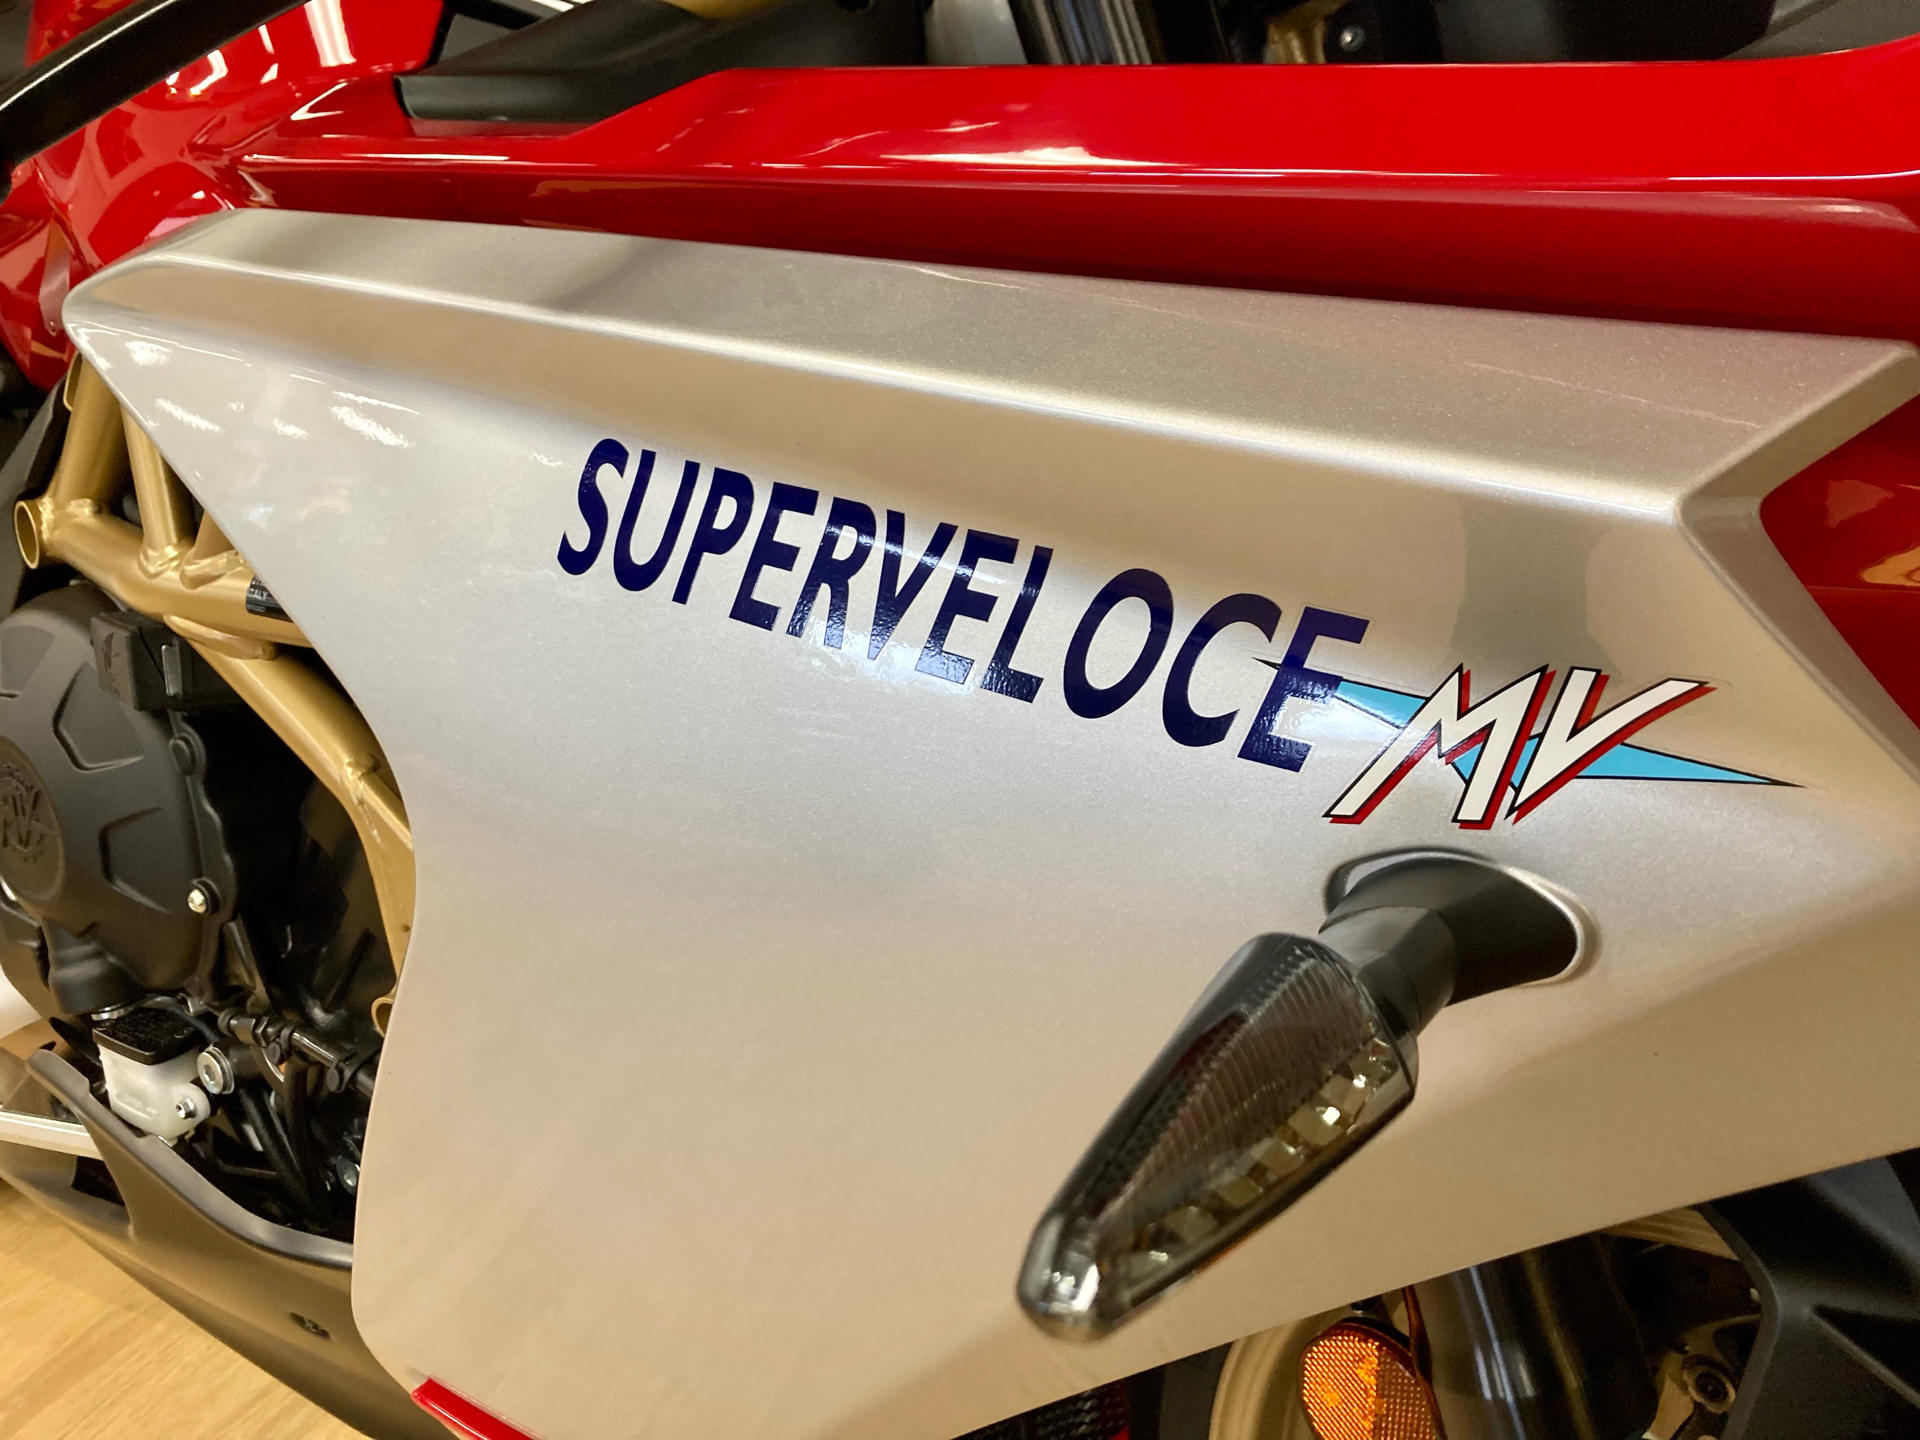 2021 MV Agusta Superveloce 800 in Mahwah, New Jersey - Photo 13